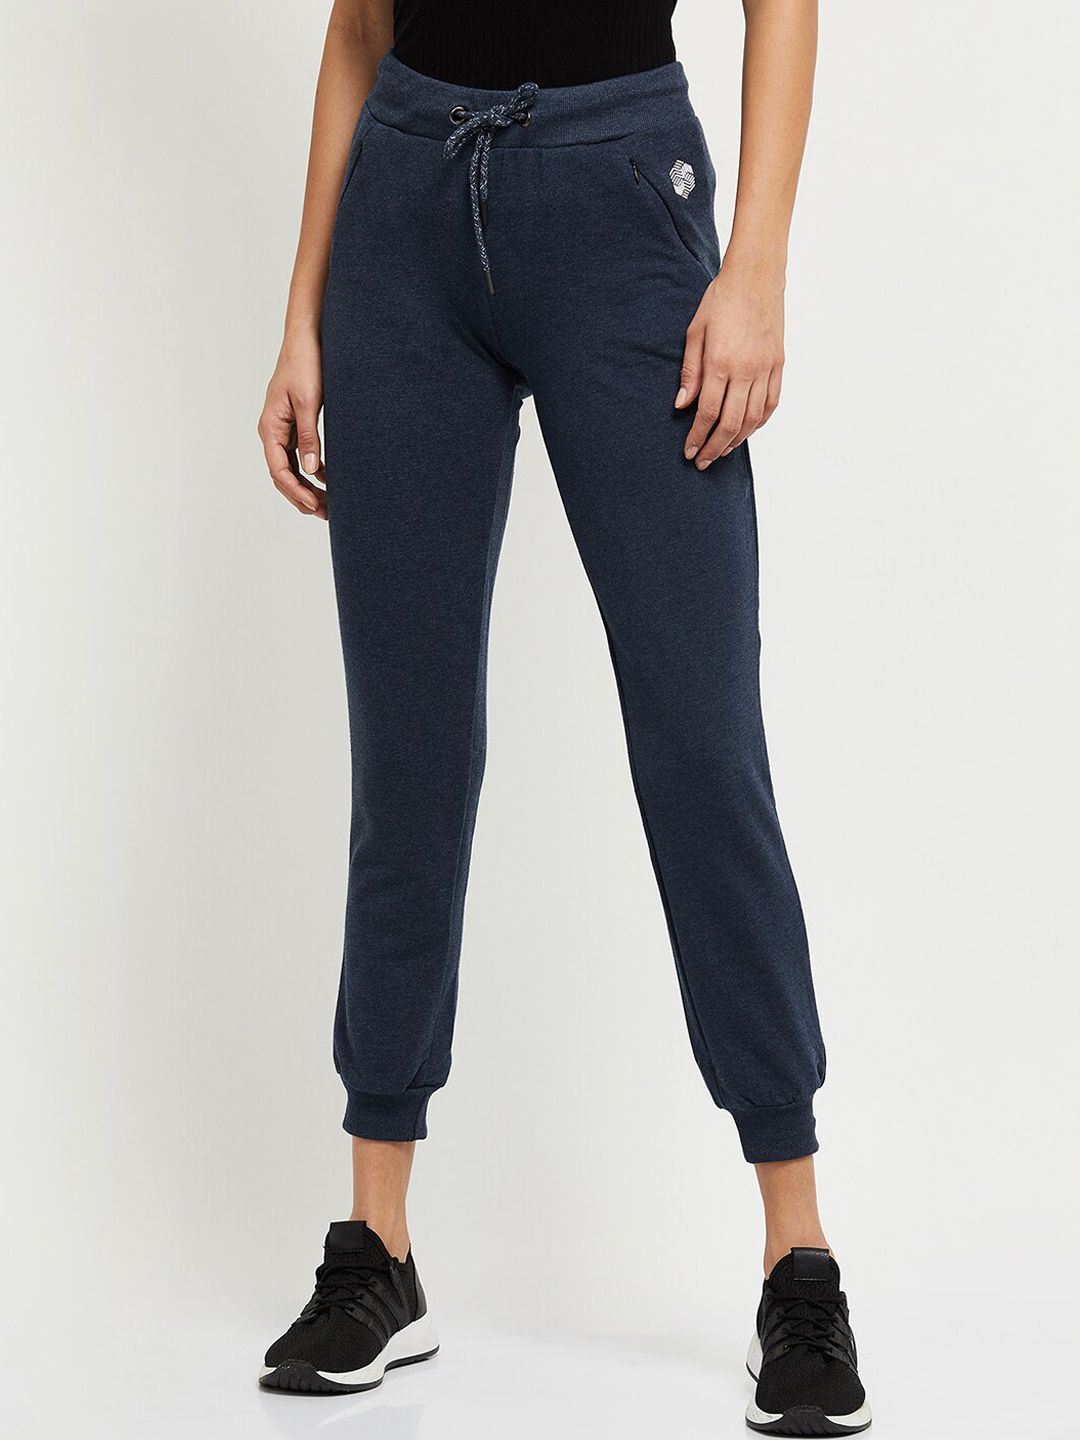 max Women Blue Solid Joggers Price in India